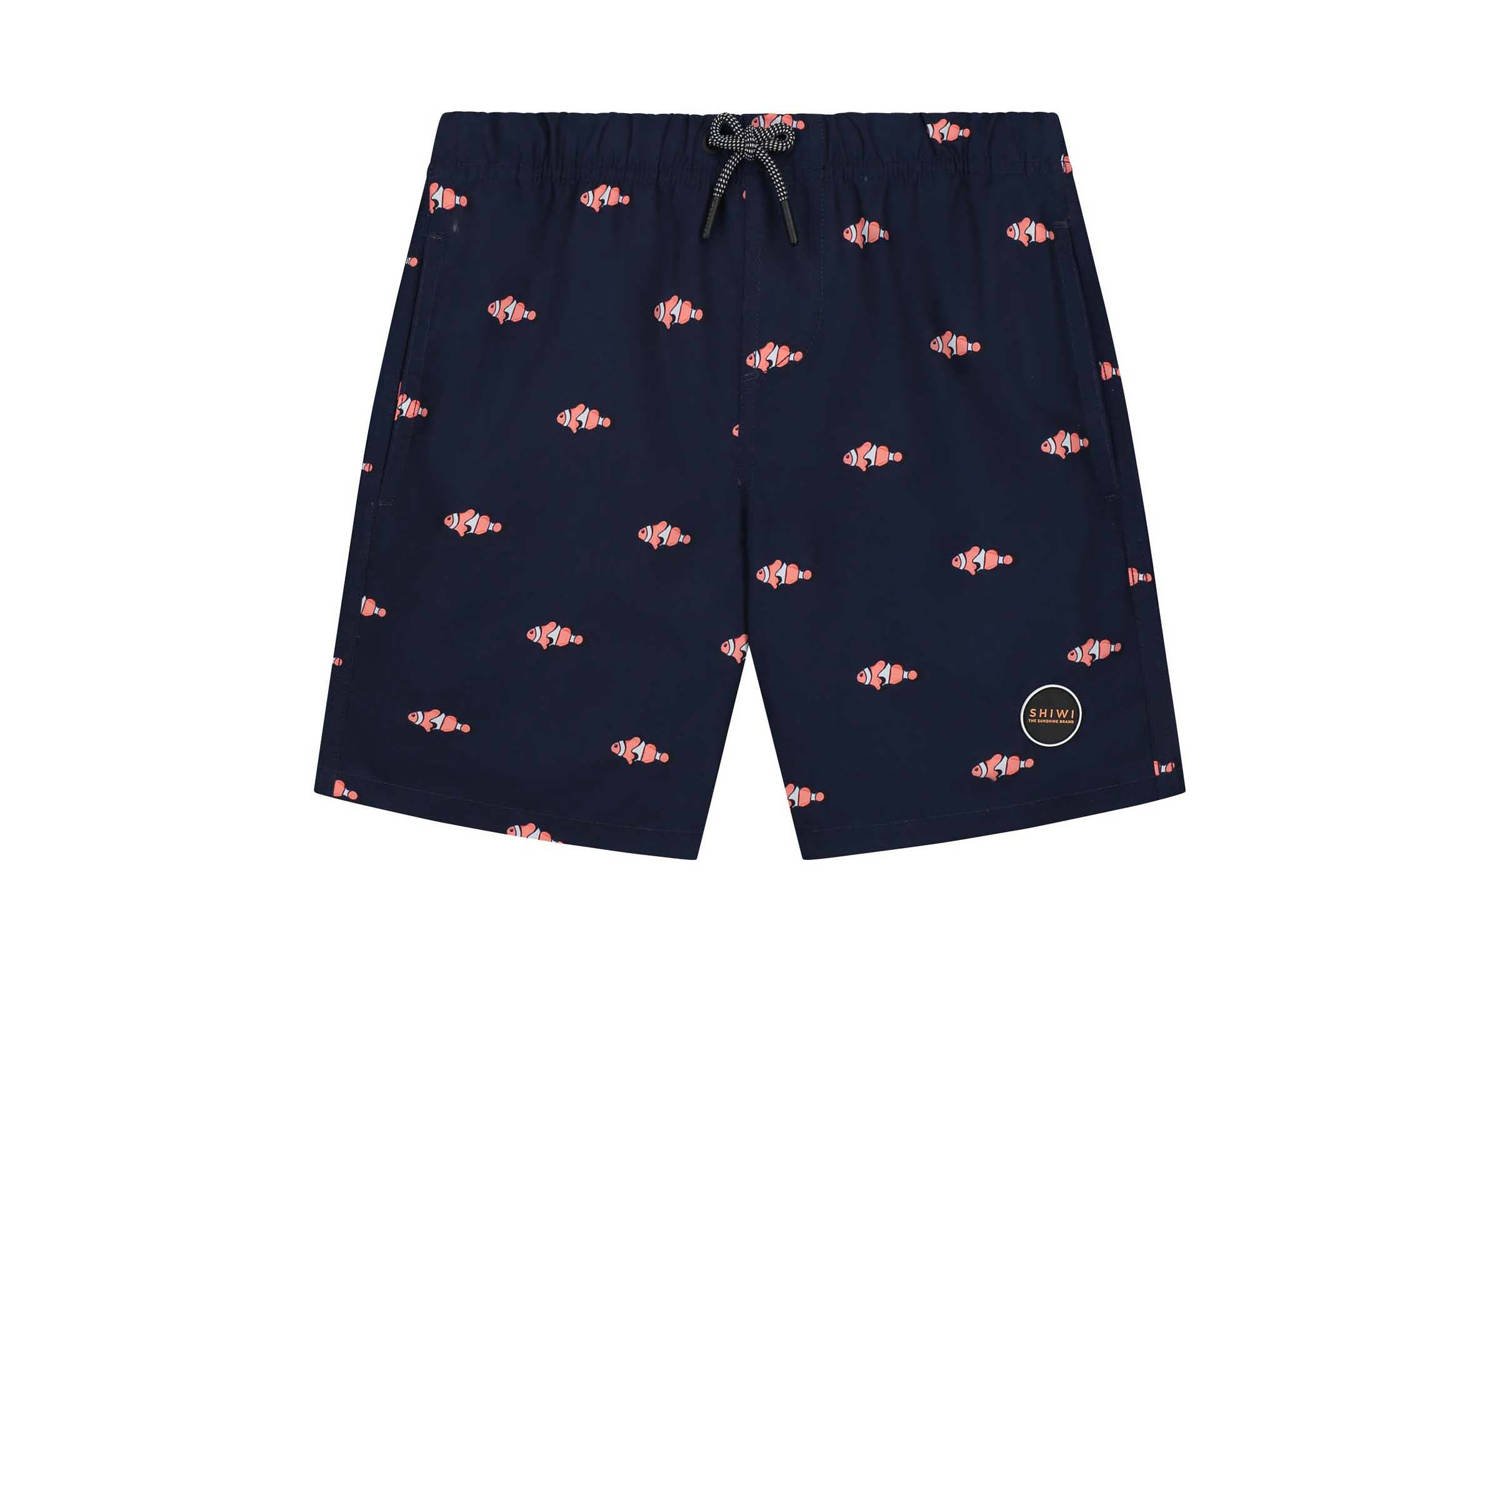 Shiwi zwemshort Clownfish donkerblauw Jongens Gerecycled polyester All over print 122 128